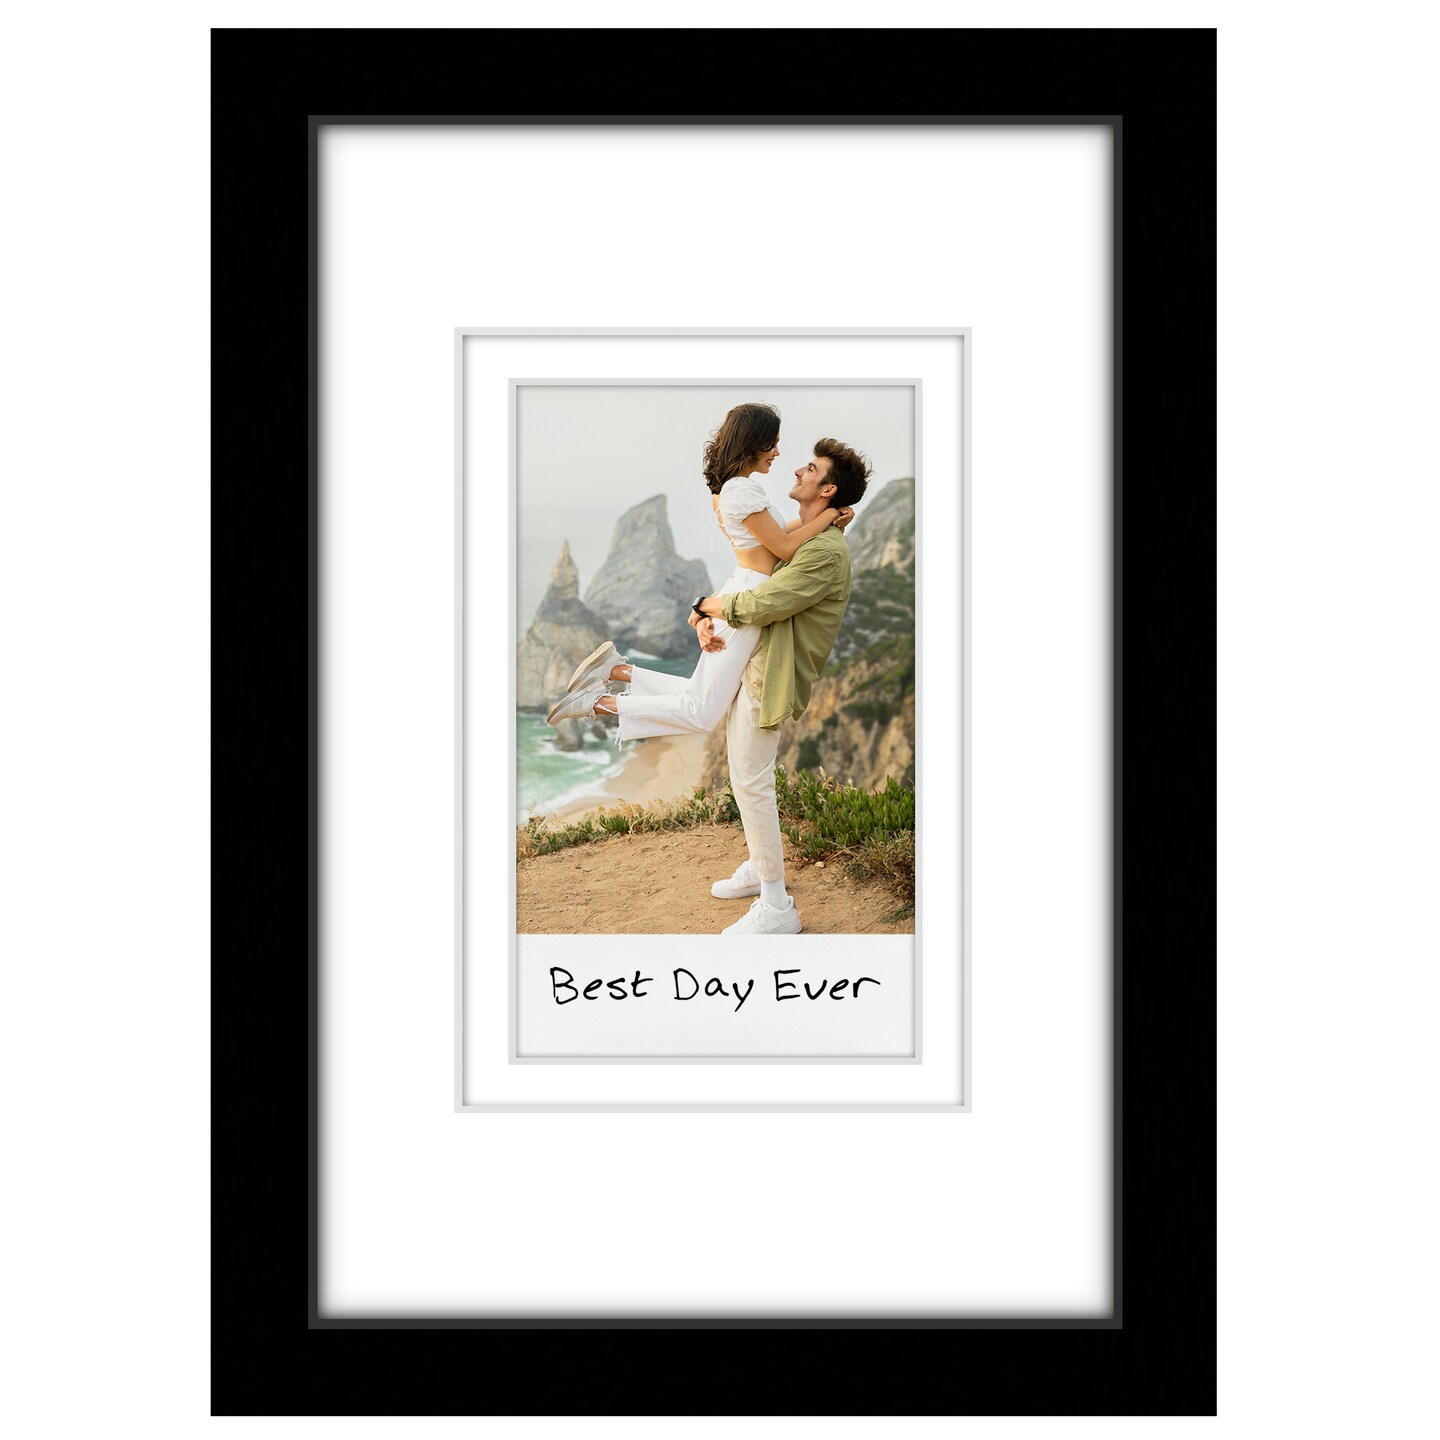 Americanflat Mini Instant Photo Frame with Mat